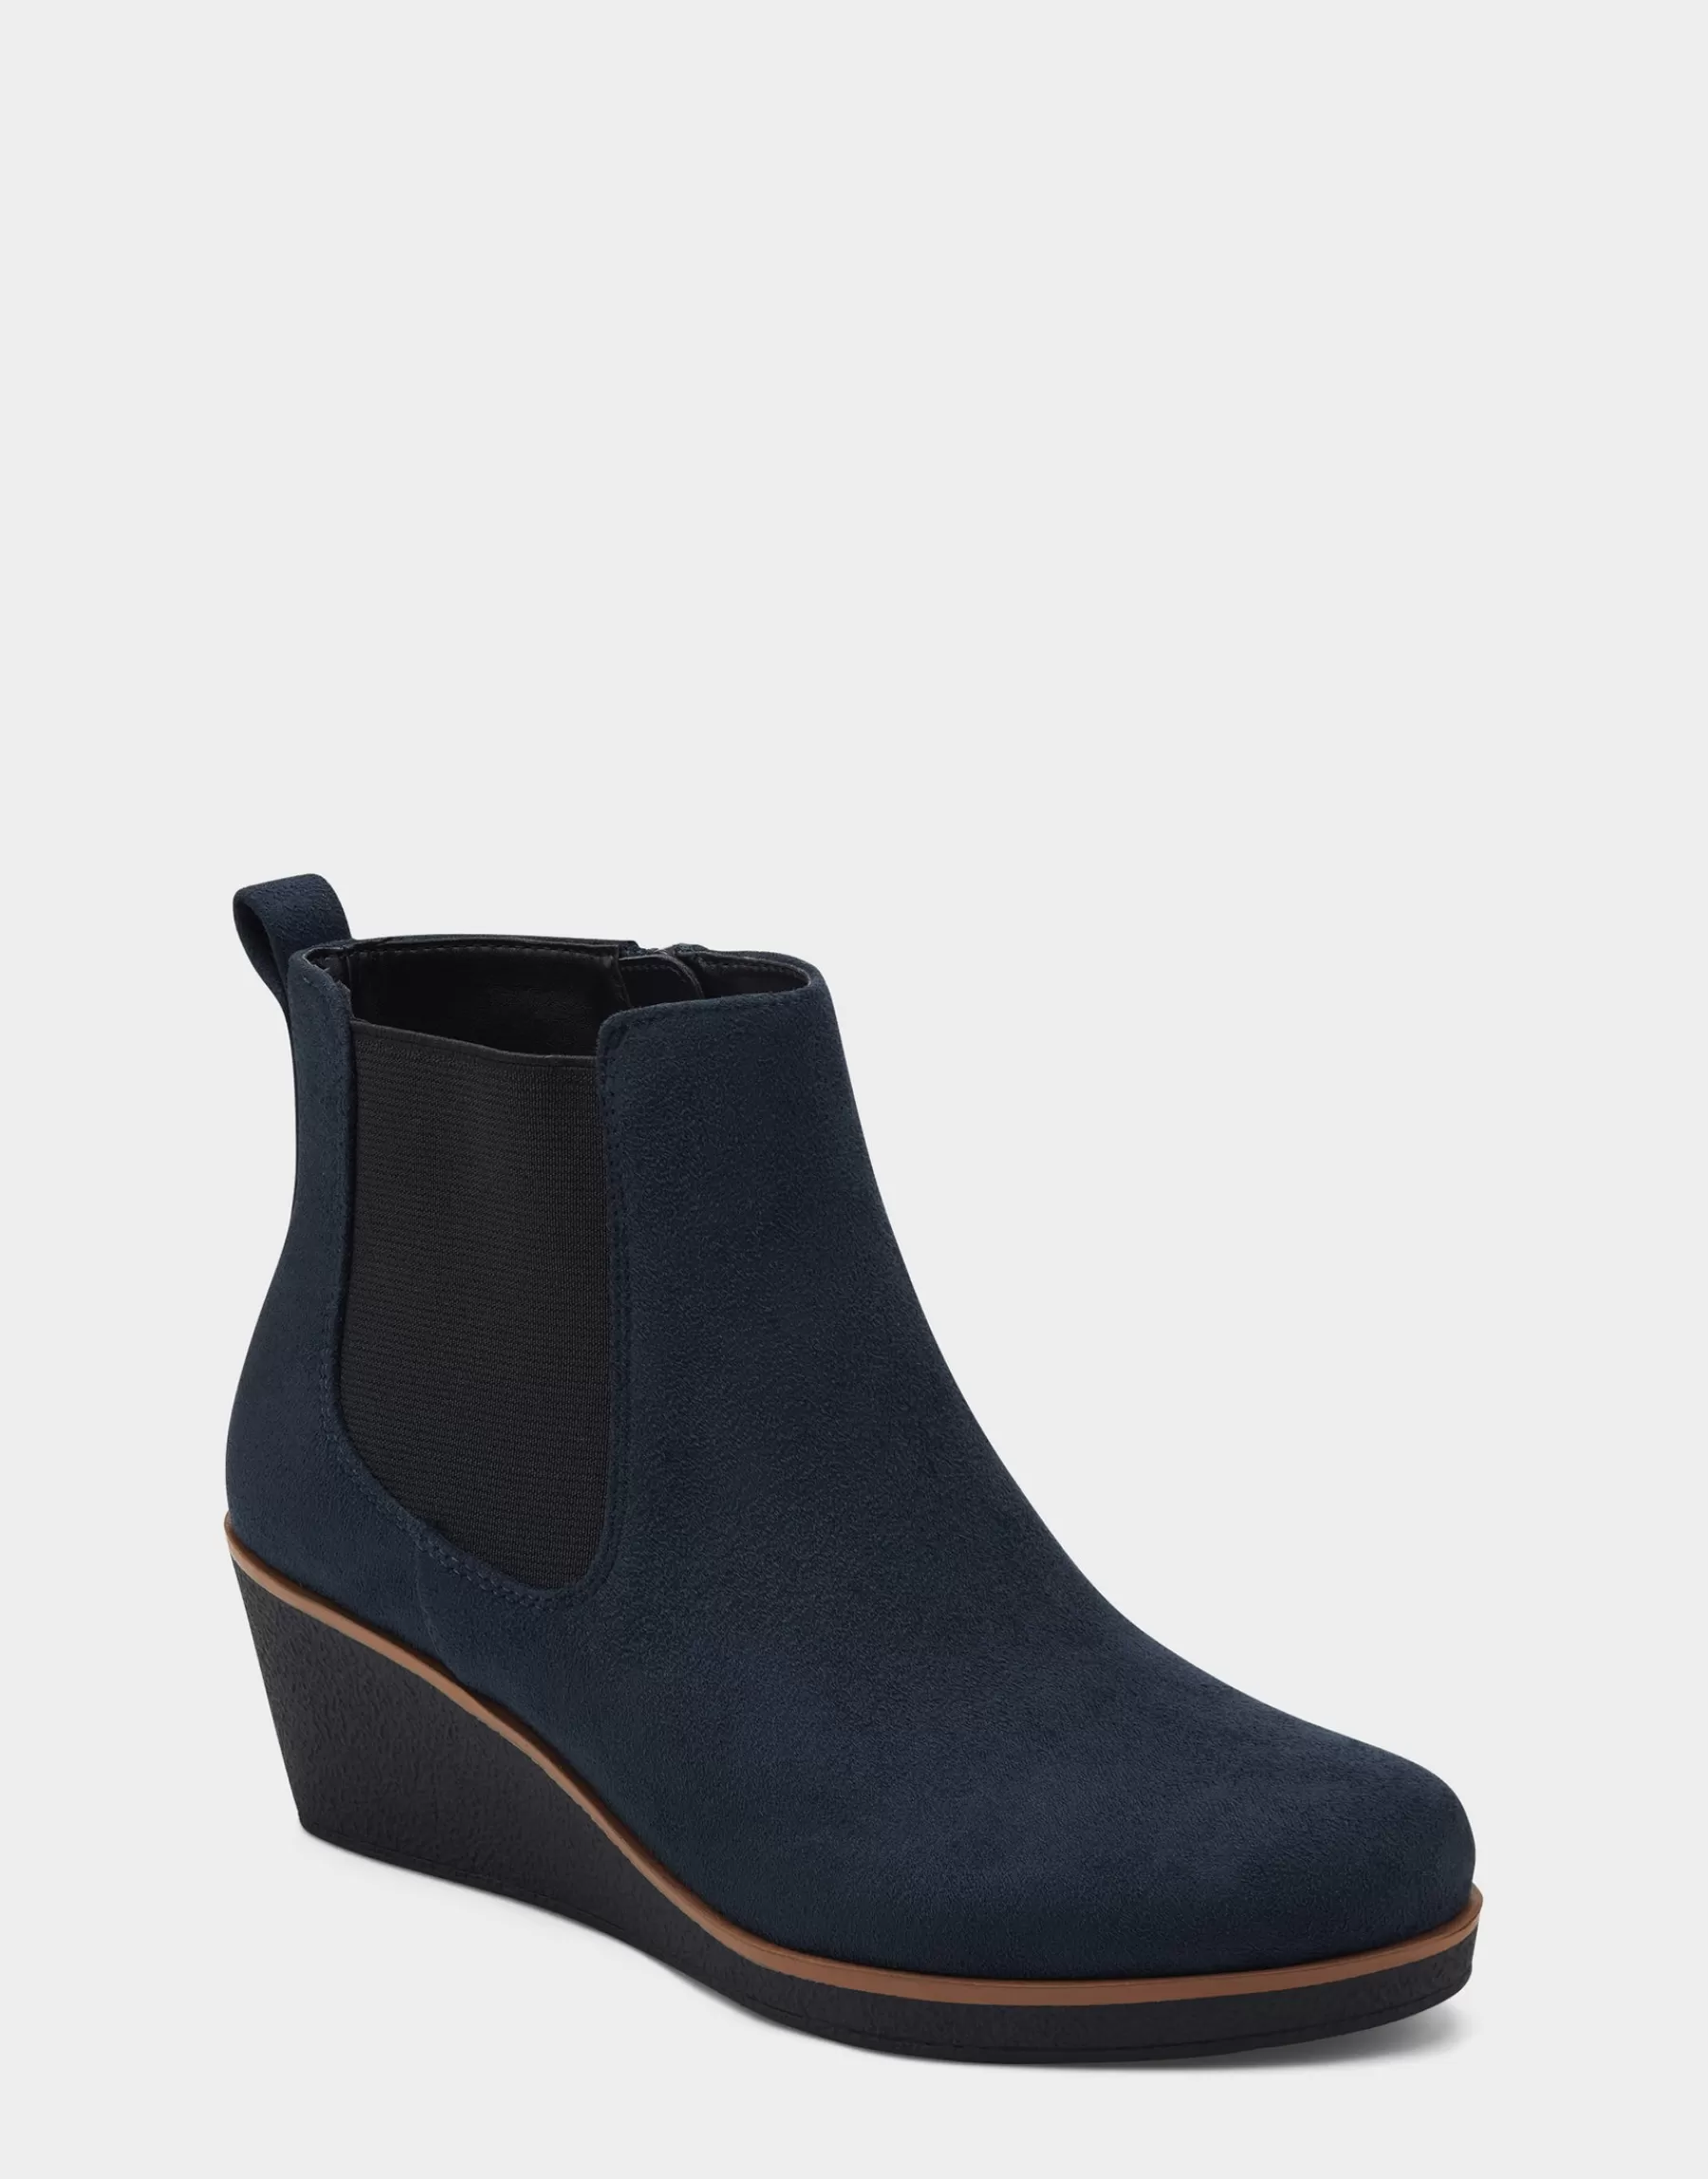 Aerosoles Comfortable Women's Ankle Boot in Navy Faux Suede Flash Sale